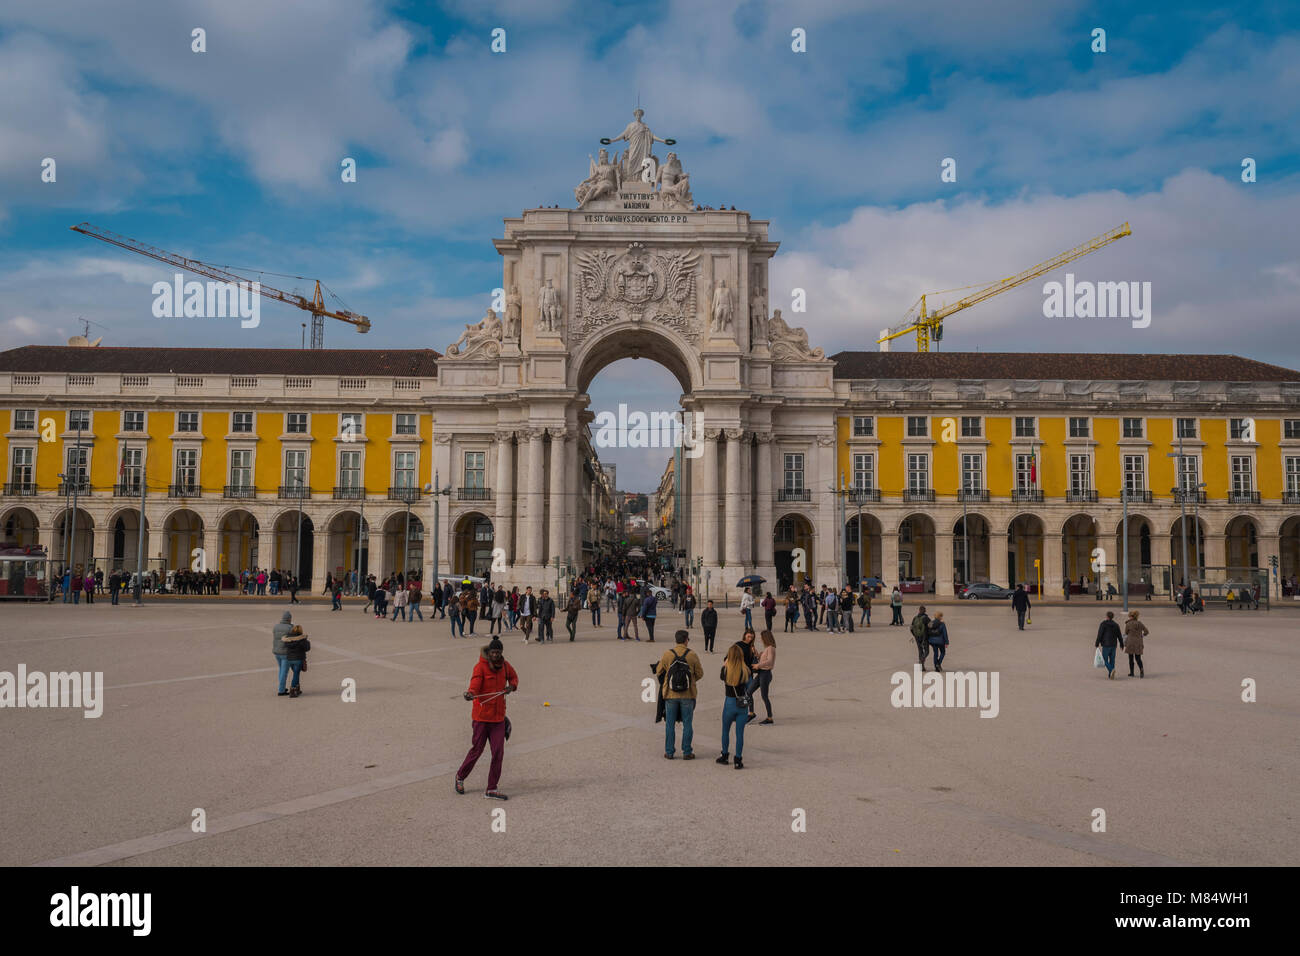 LISBON / PORTUGAL - FEBRUARY 17 2018: HISTORICAL SQUARE AND SCULPTURE IN LISBON Stock Photo